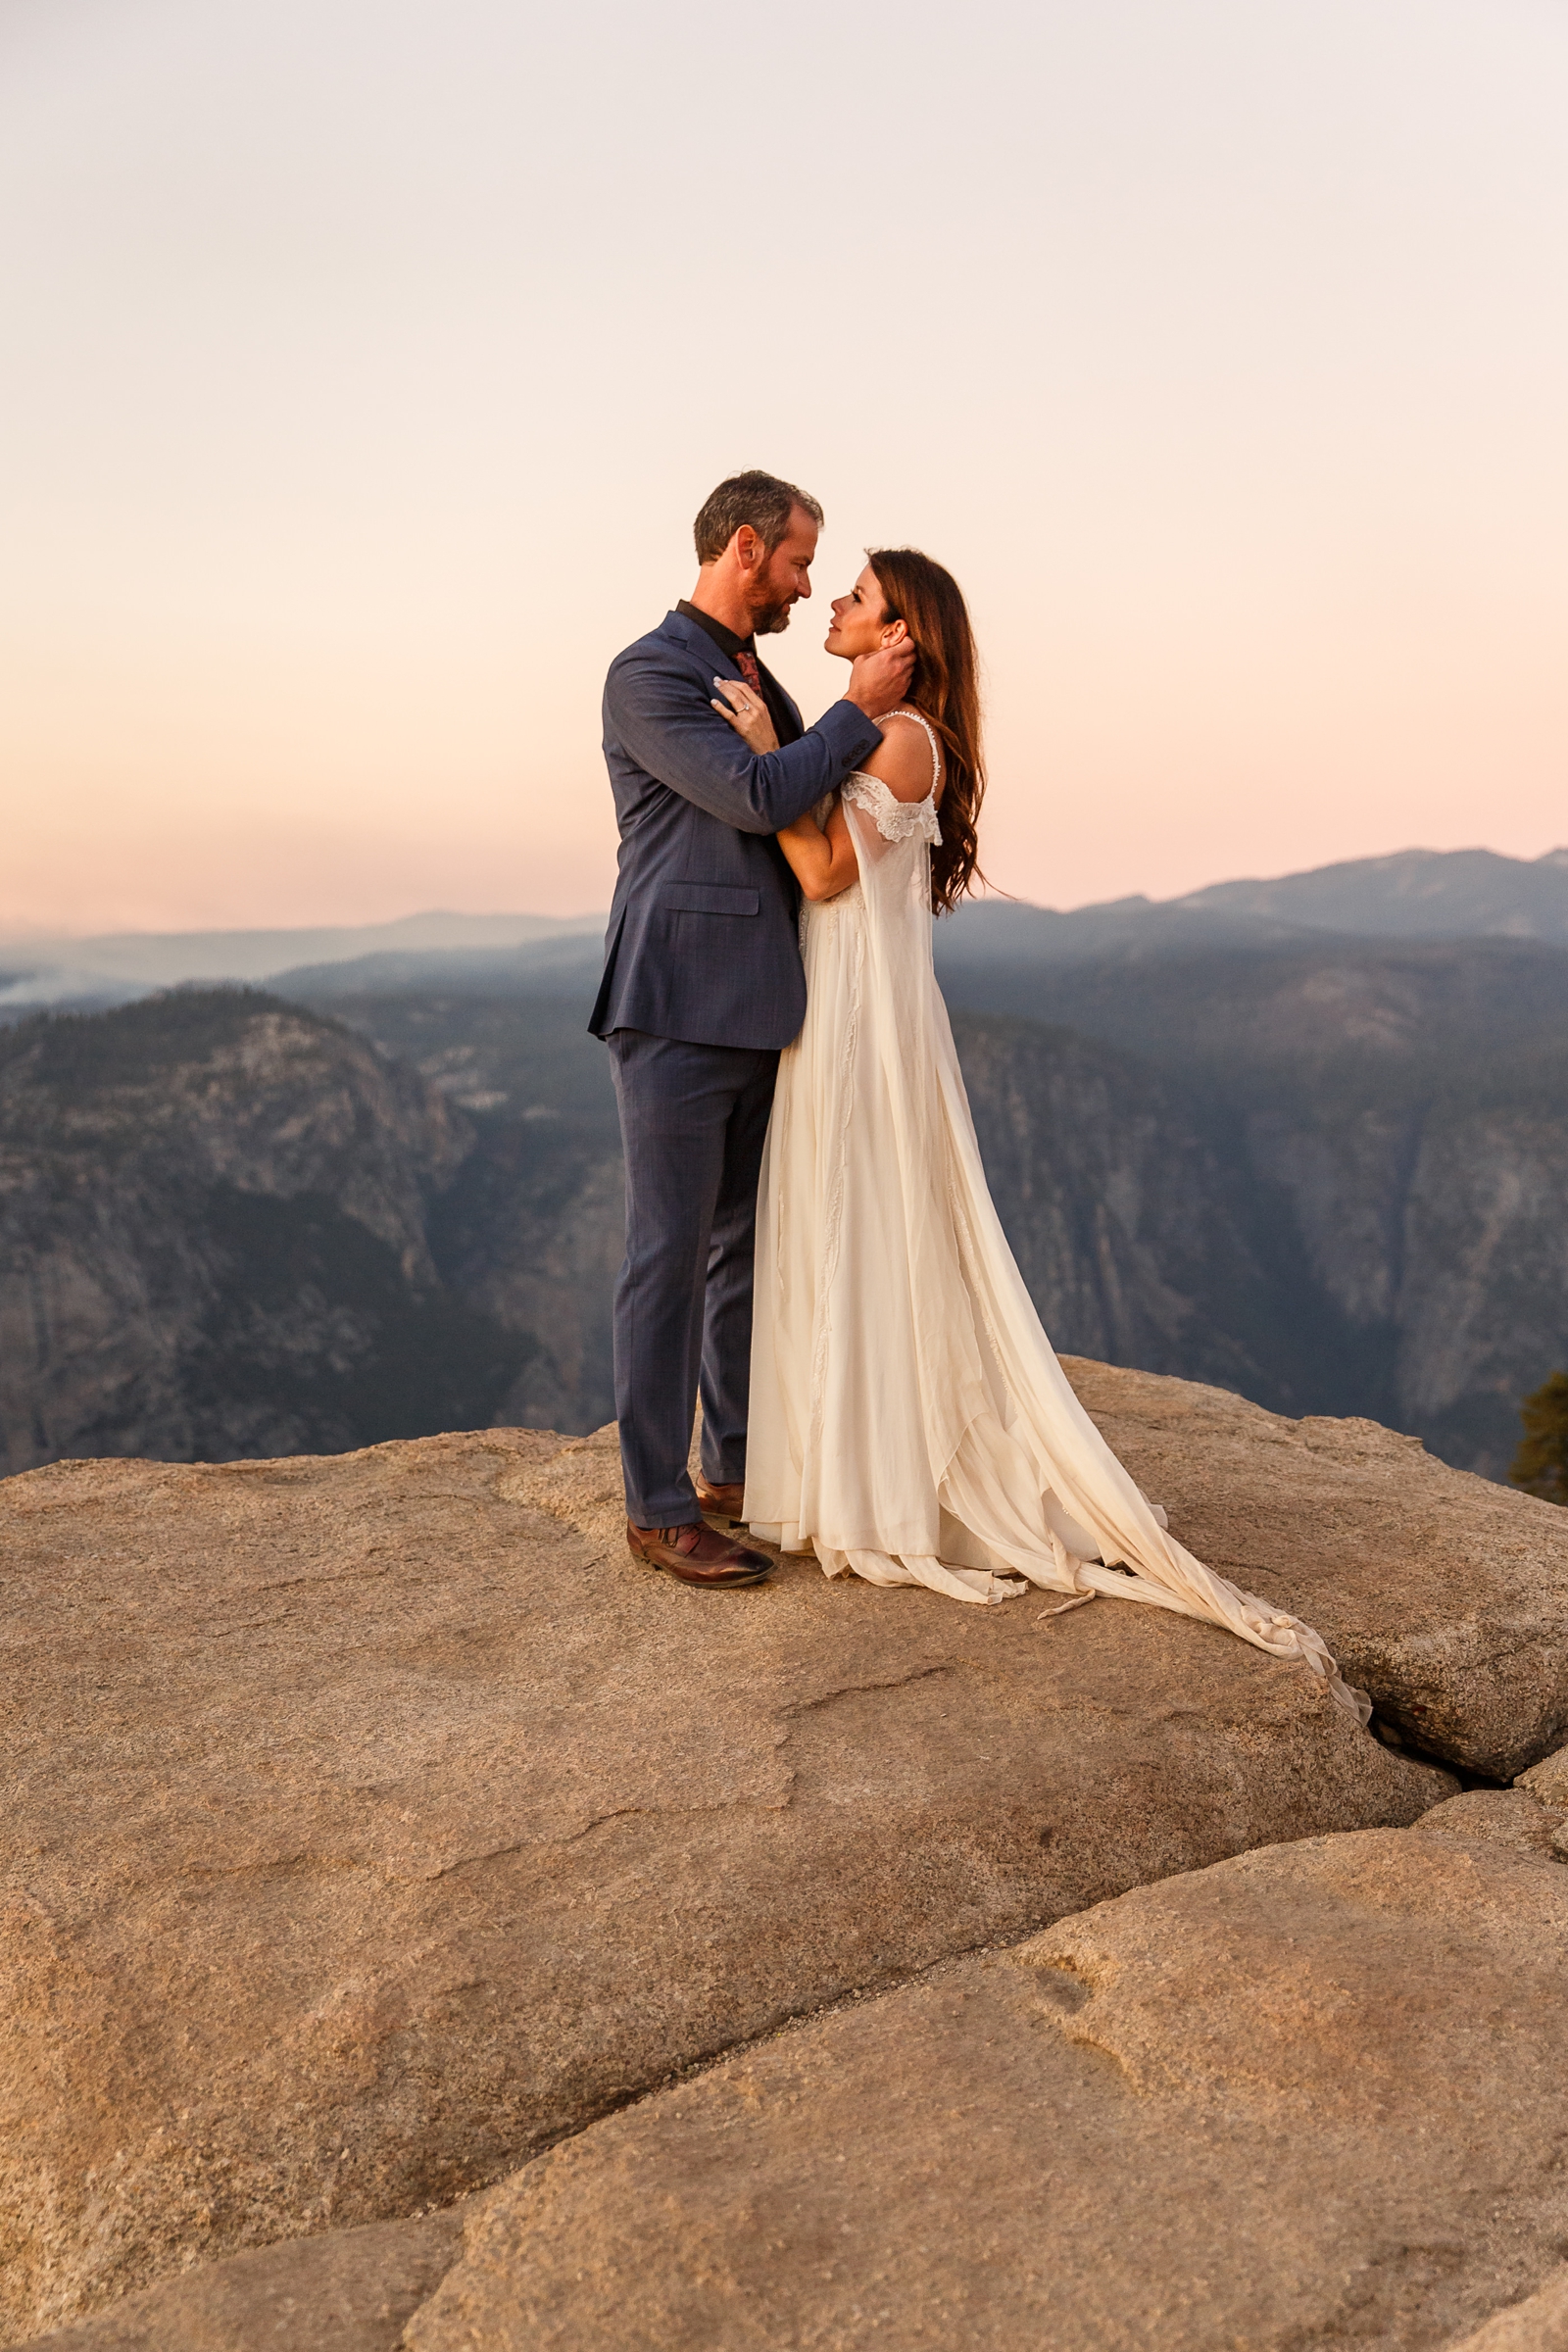 Tender caresses during this couple's Yosemite National Park elopement.